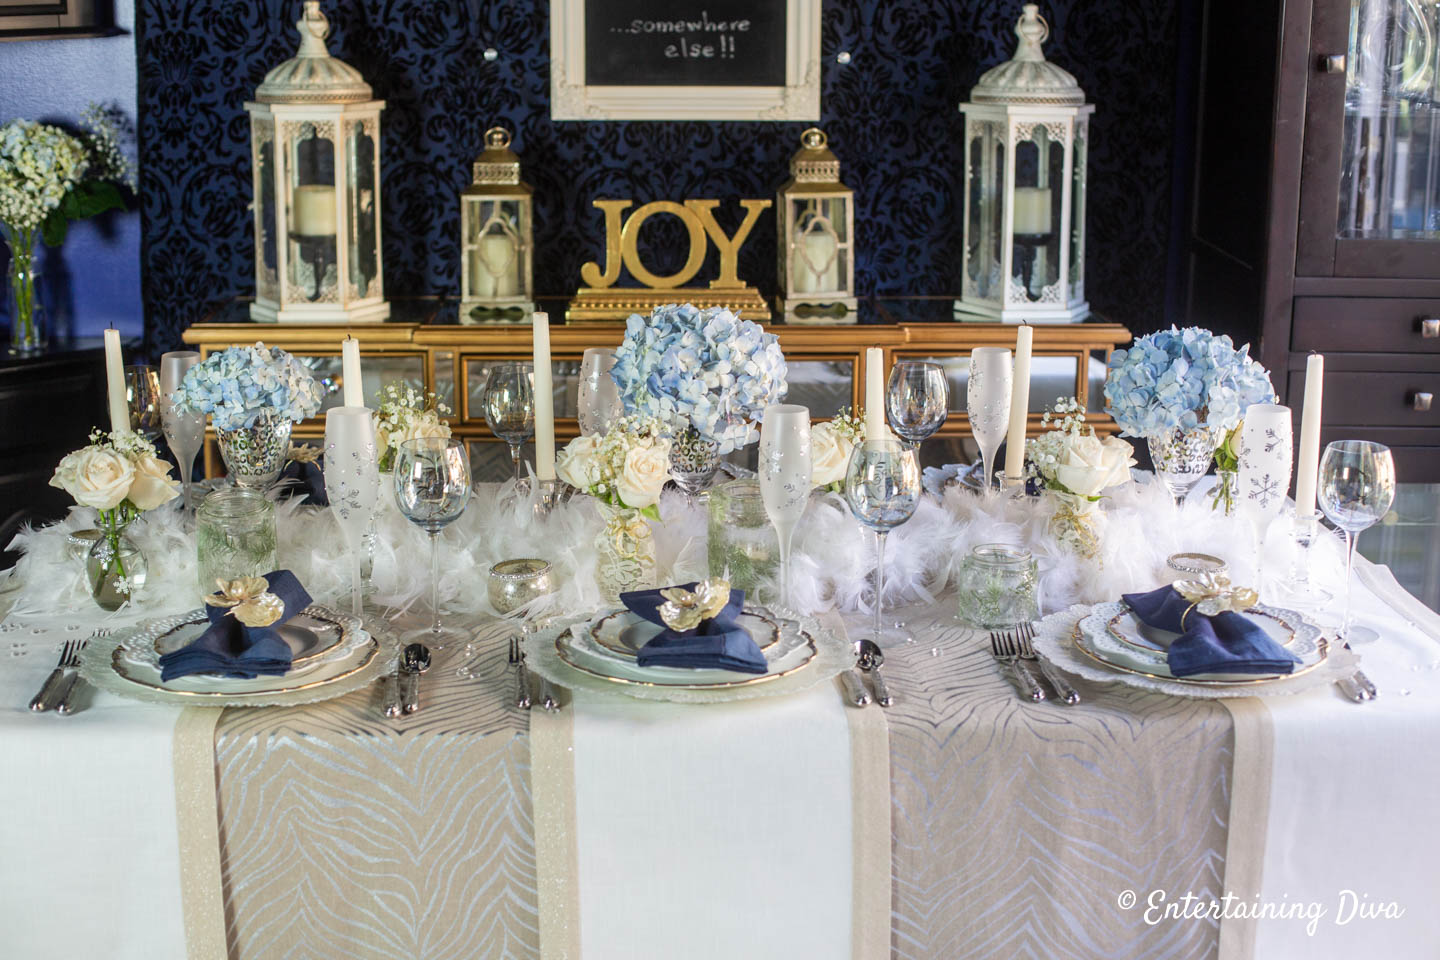 White, gold and silver table runners used as a tablecloth